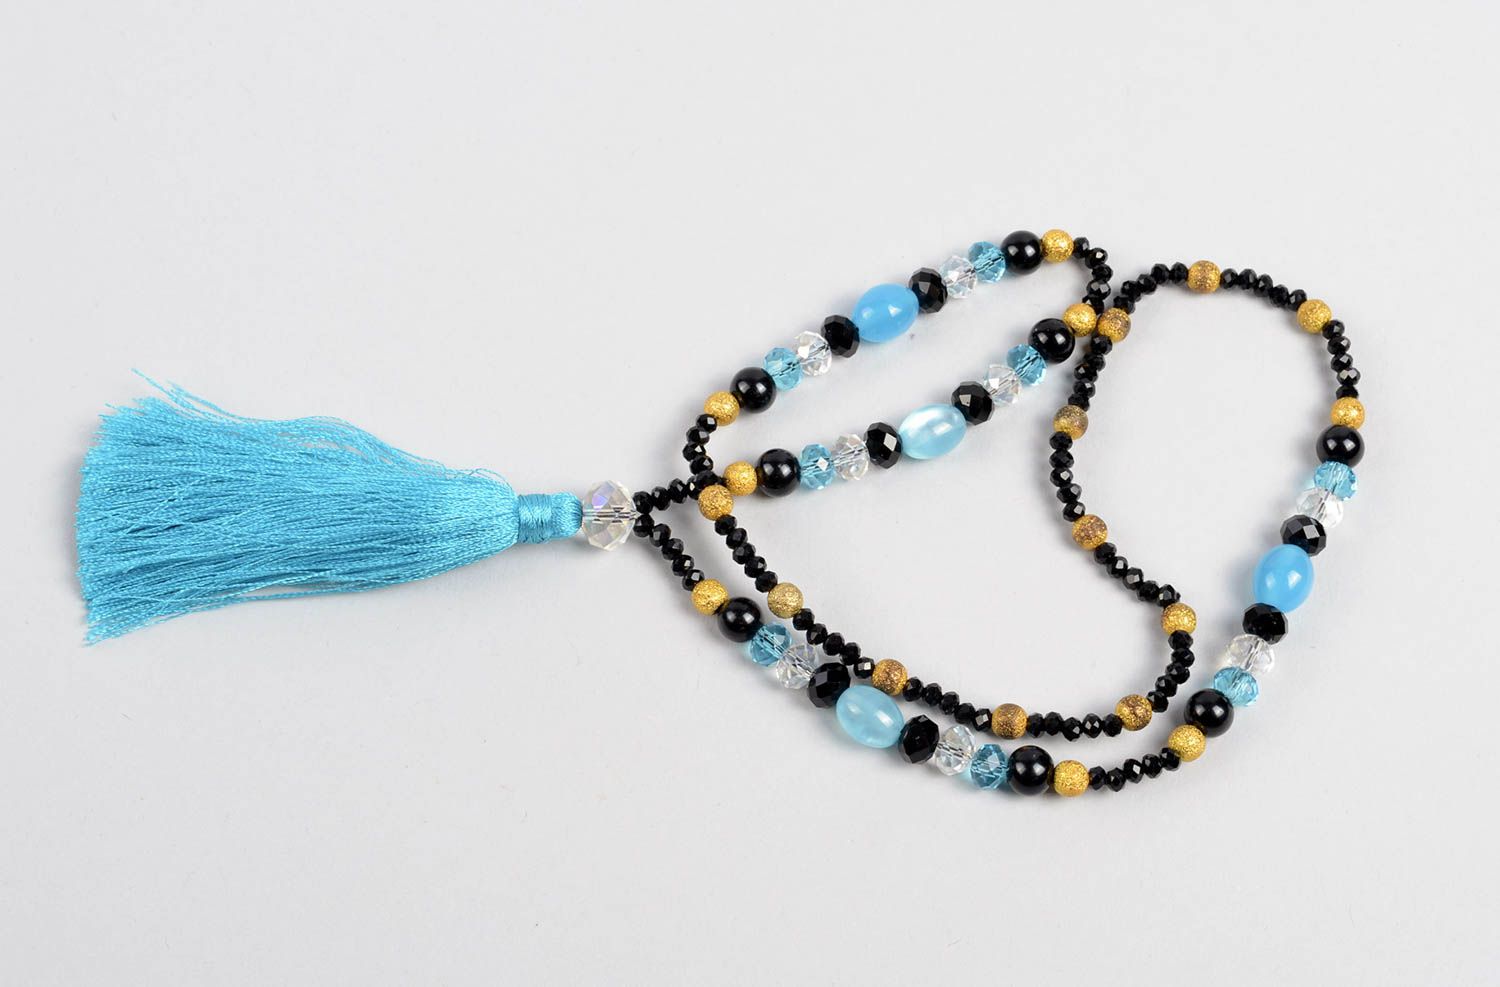 Handmade jewelry beaded necklace long necklaces designer accessories cool gifts photo 1